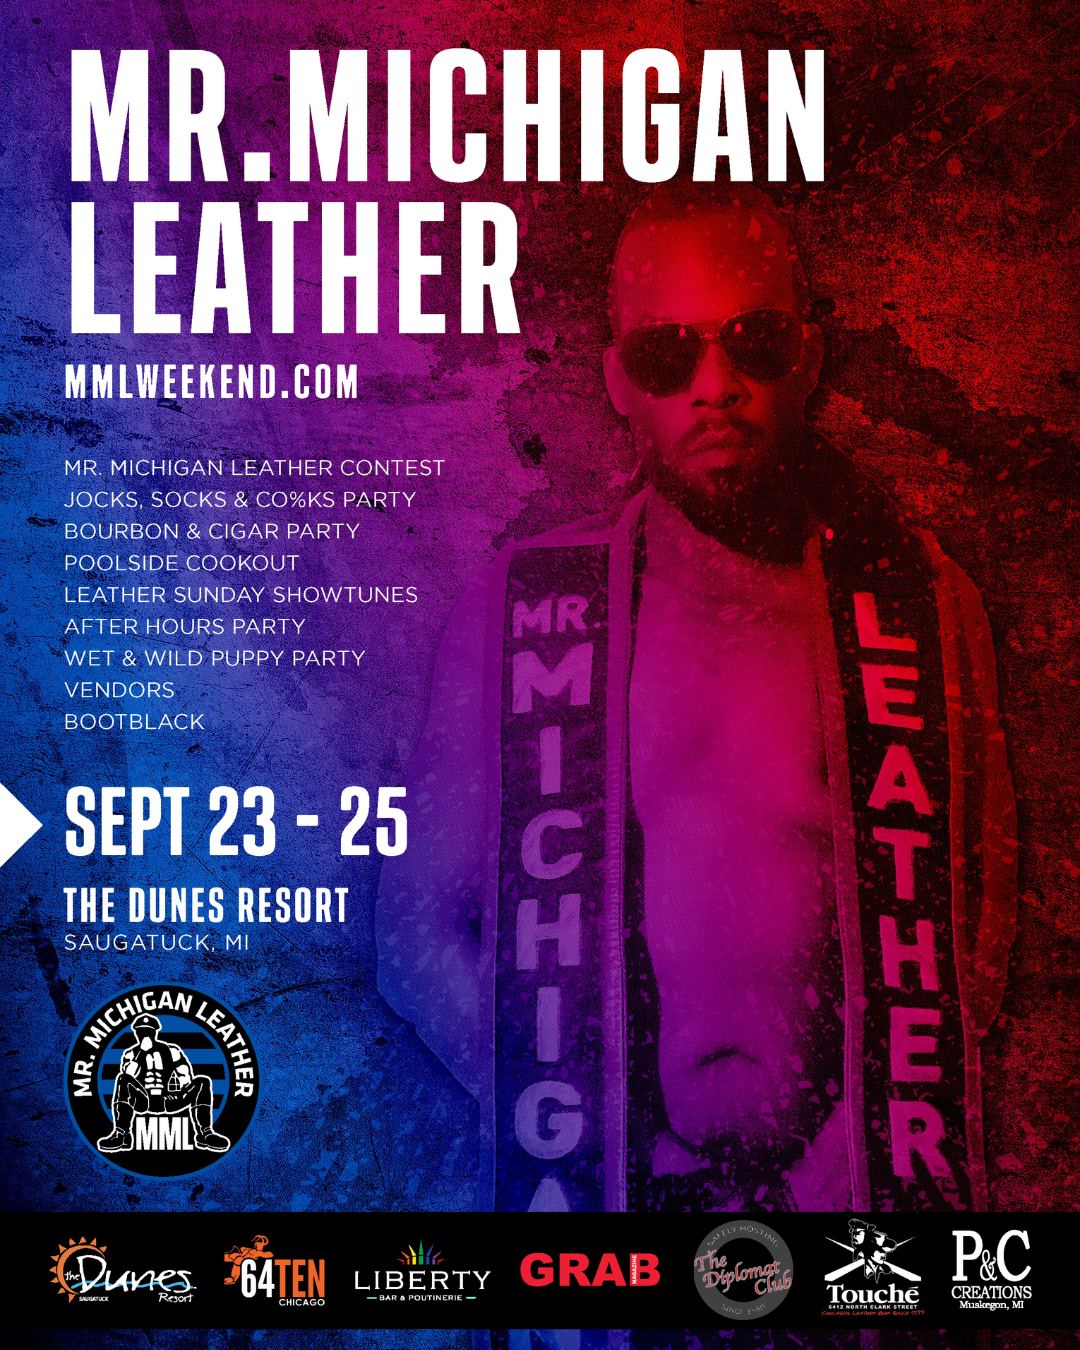 A man with sunglasses and a sash that reads, "Mr. Michigan Leather" posing without a shirt on